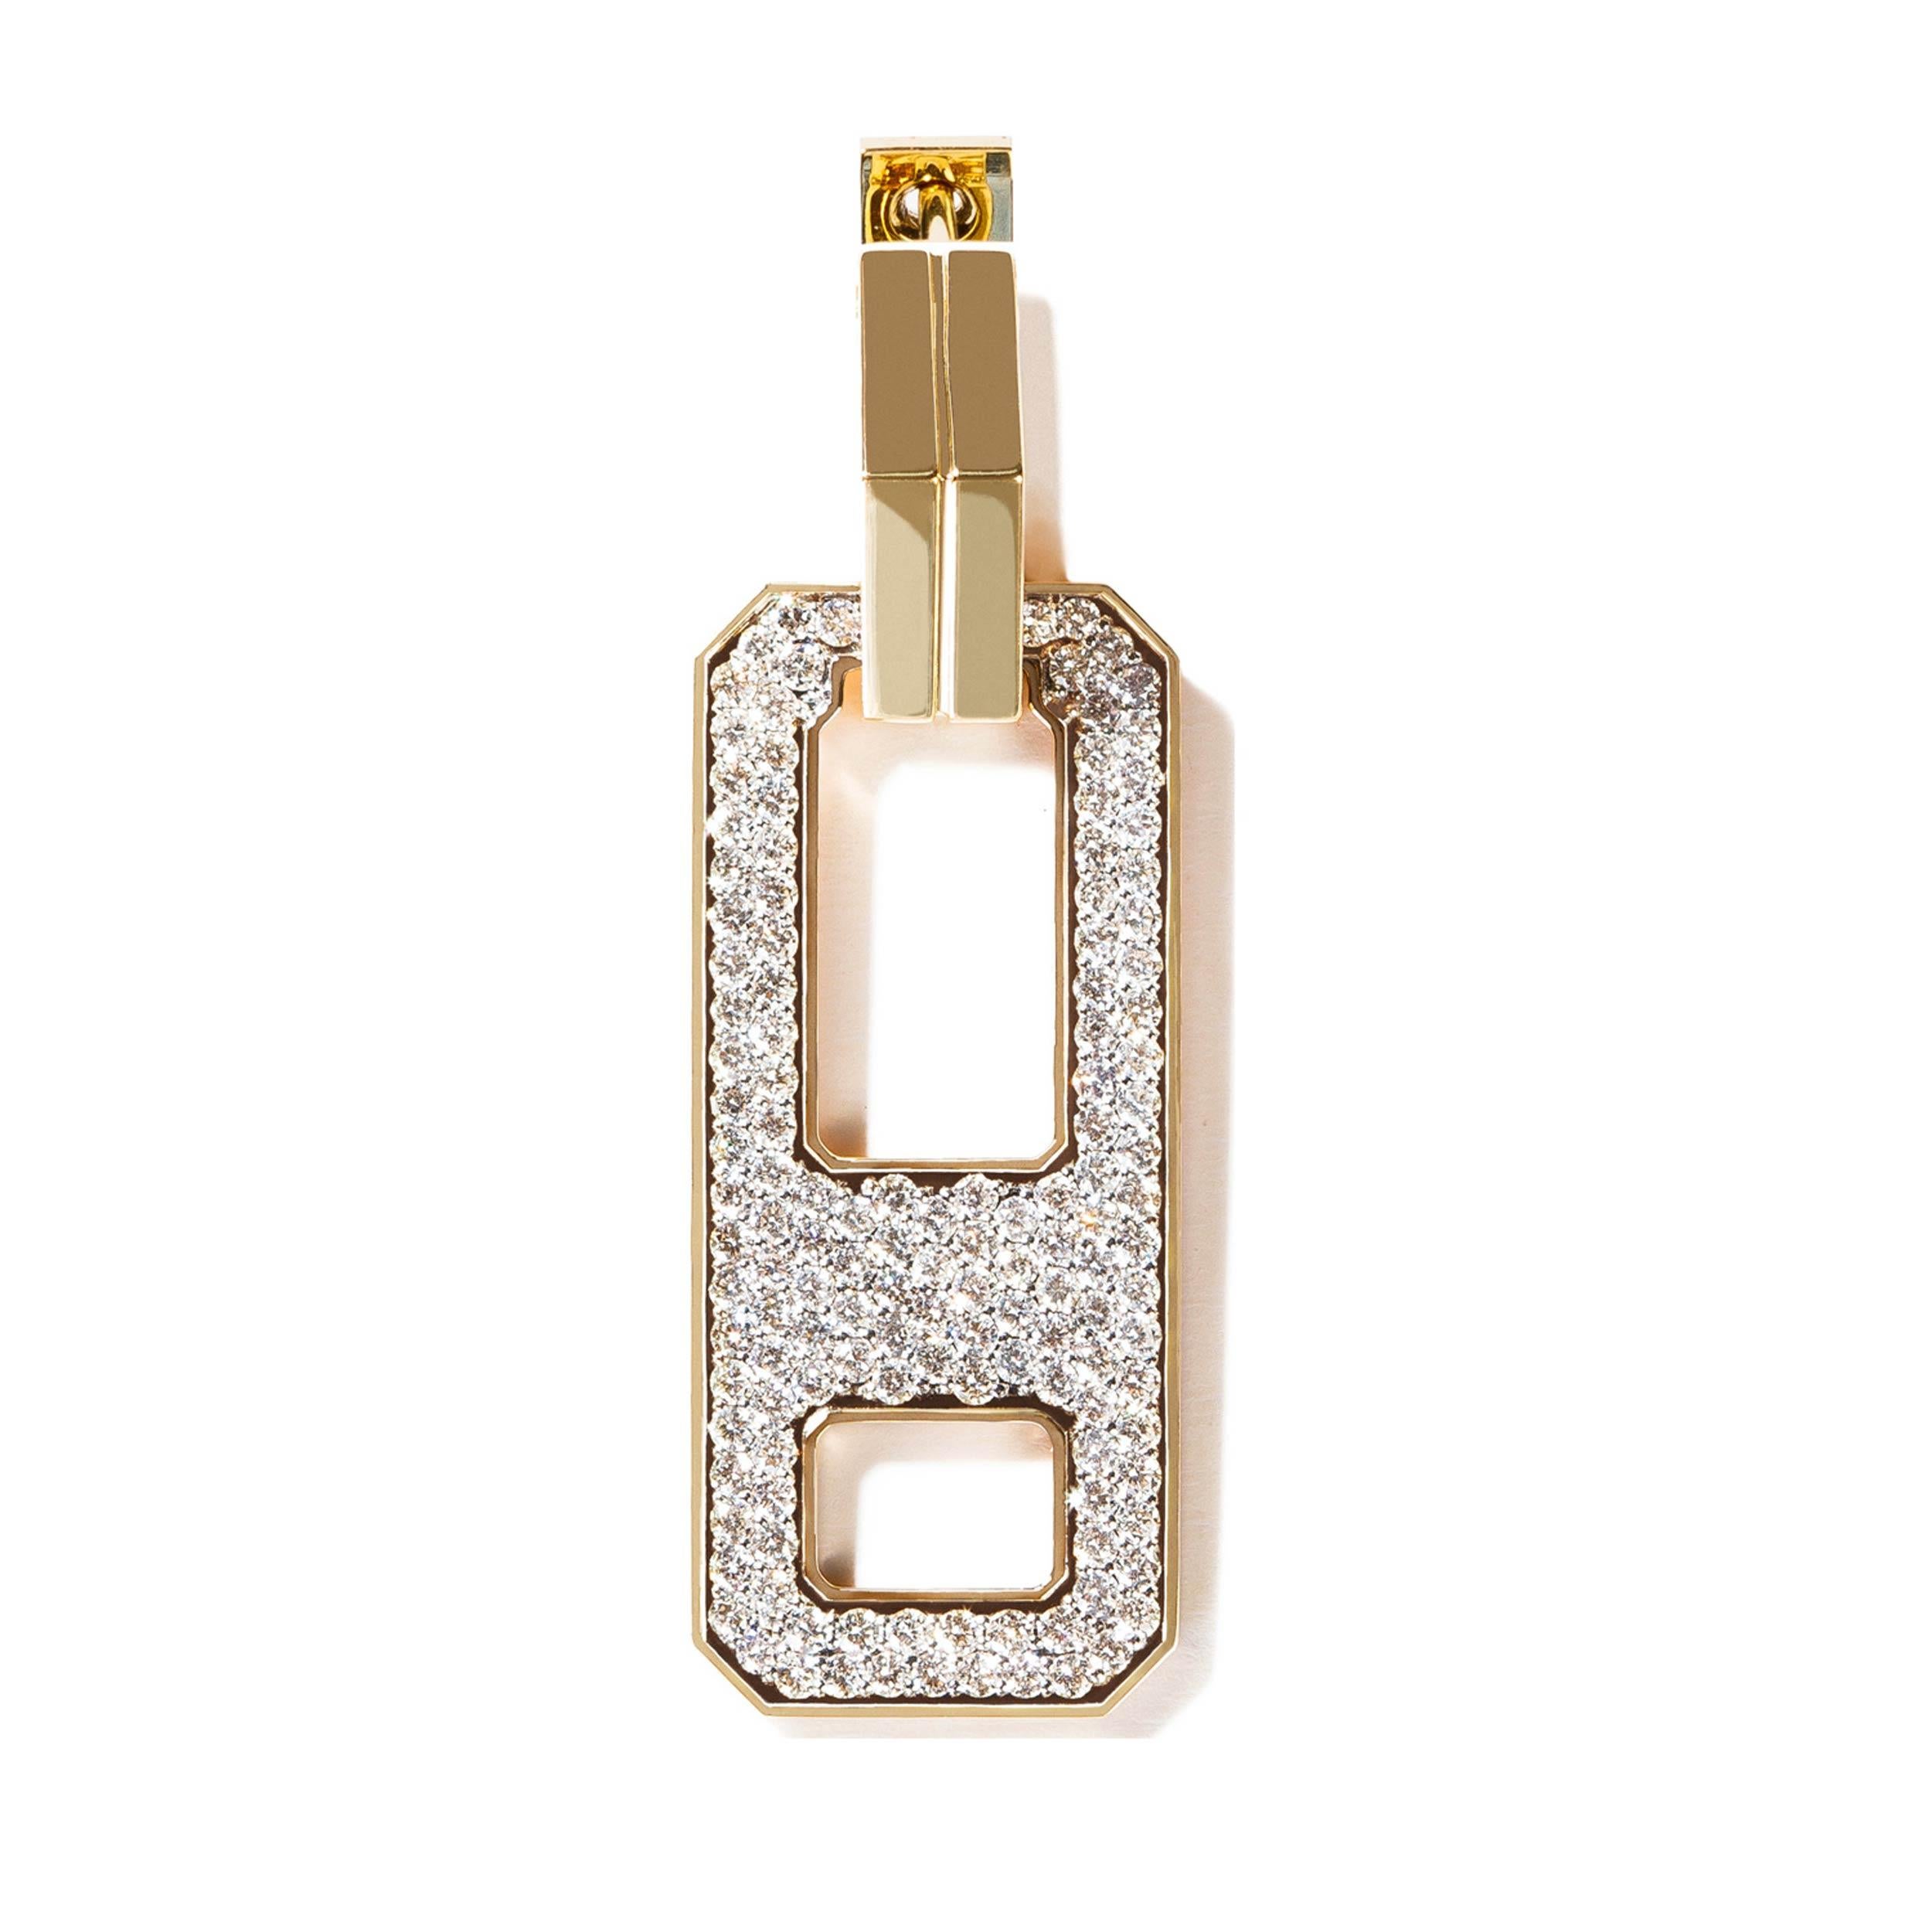 Add a touch of glamour to your everyday with our dangling drop earring.

Crafted in 18k gold, this chic earring is detailed with an angled solid gold huggie hoop and finished with a pave diamond drop design. Dress up your everyday wear, or elegantly